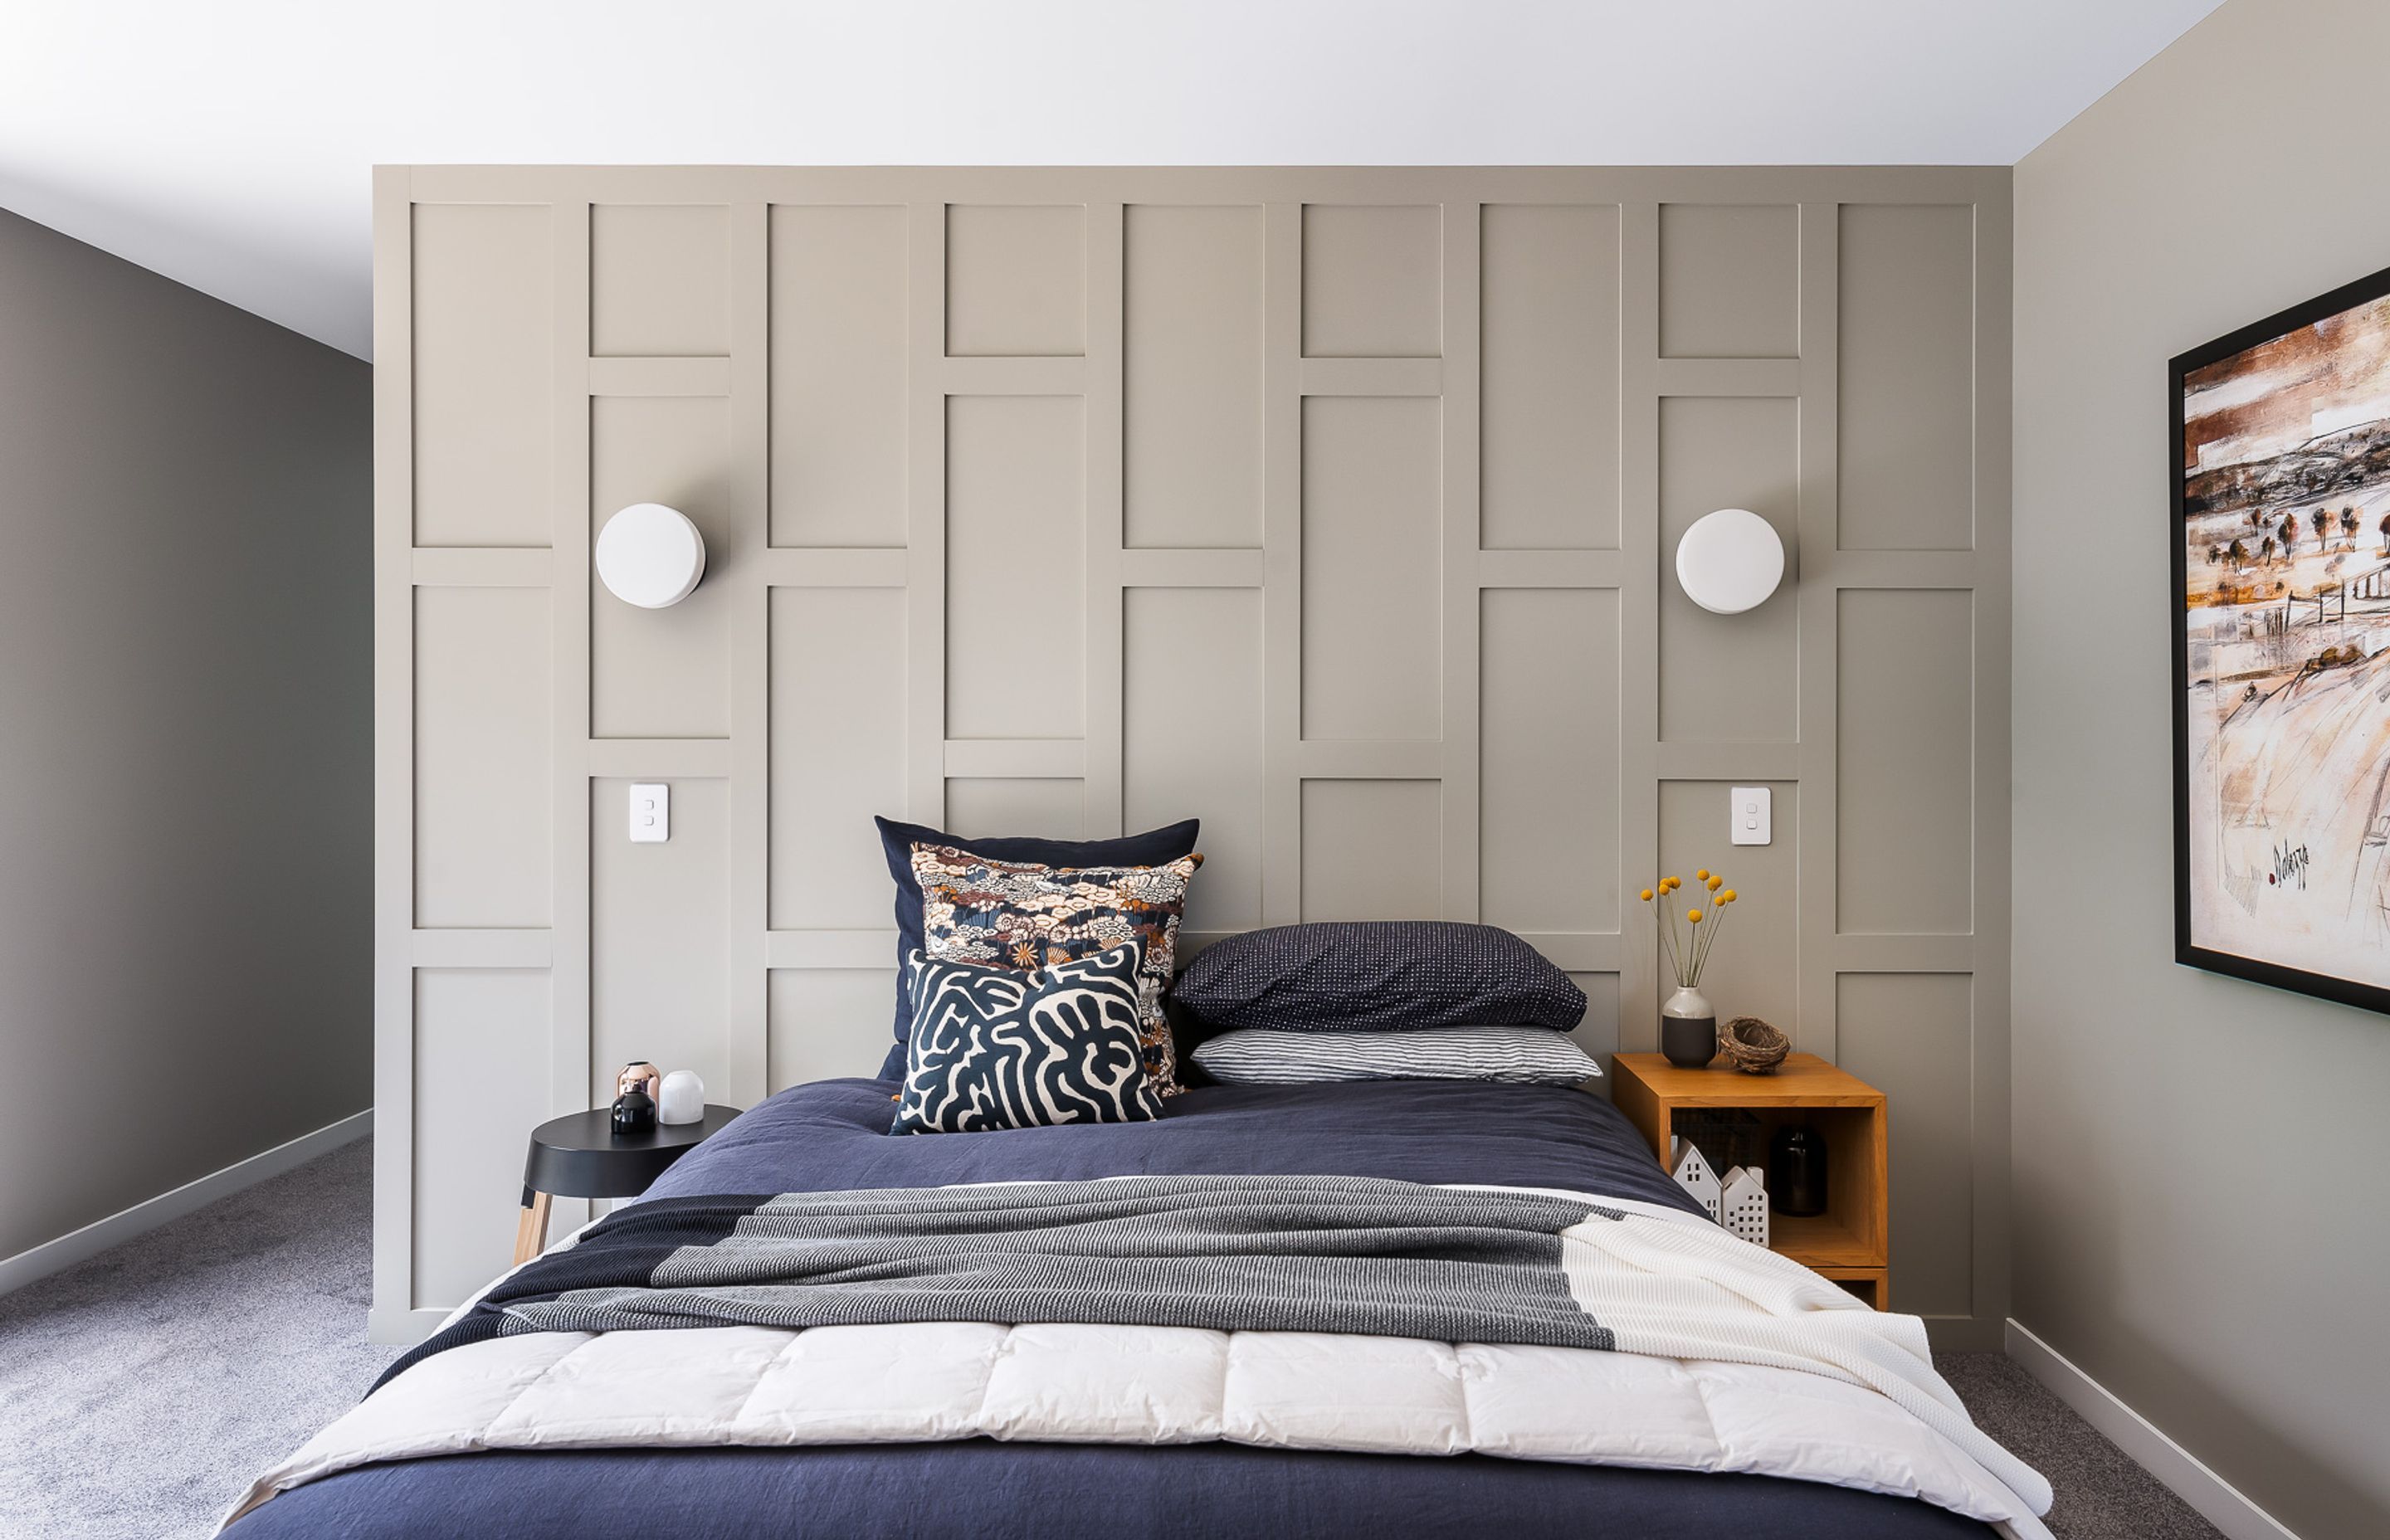 The vertical motif has been repeated in the main bedroom as a striking battened bedhead feature.